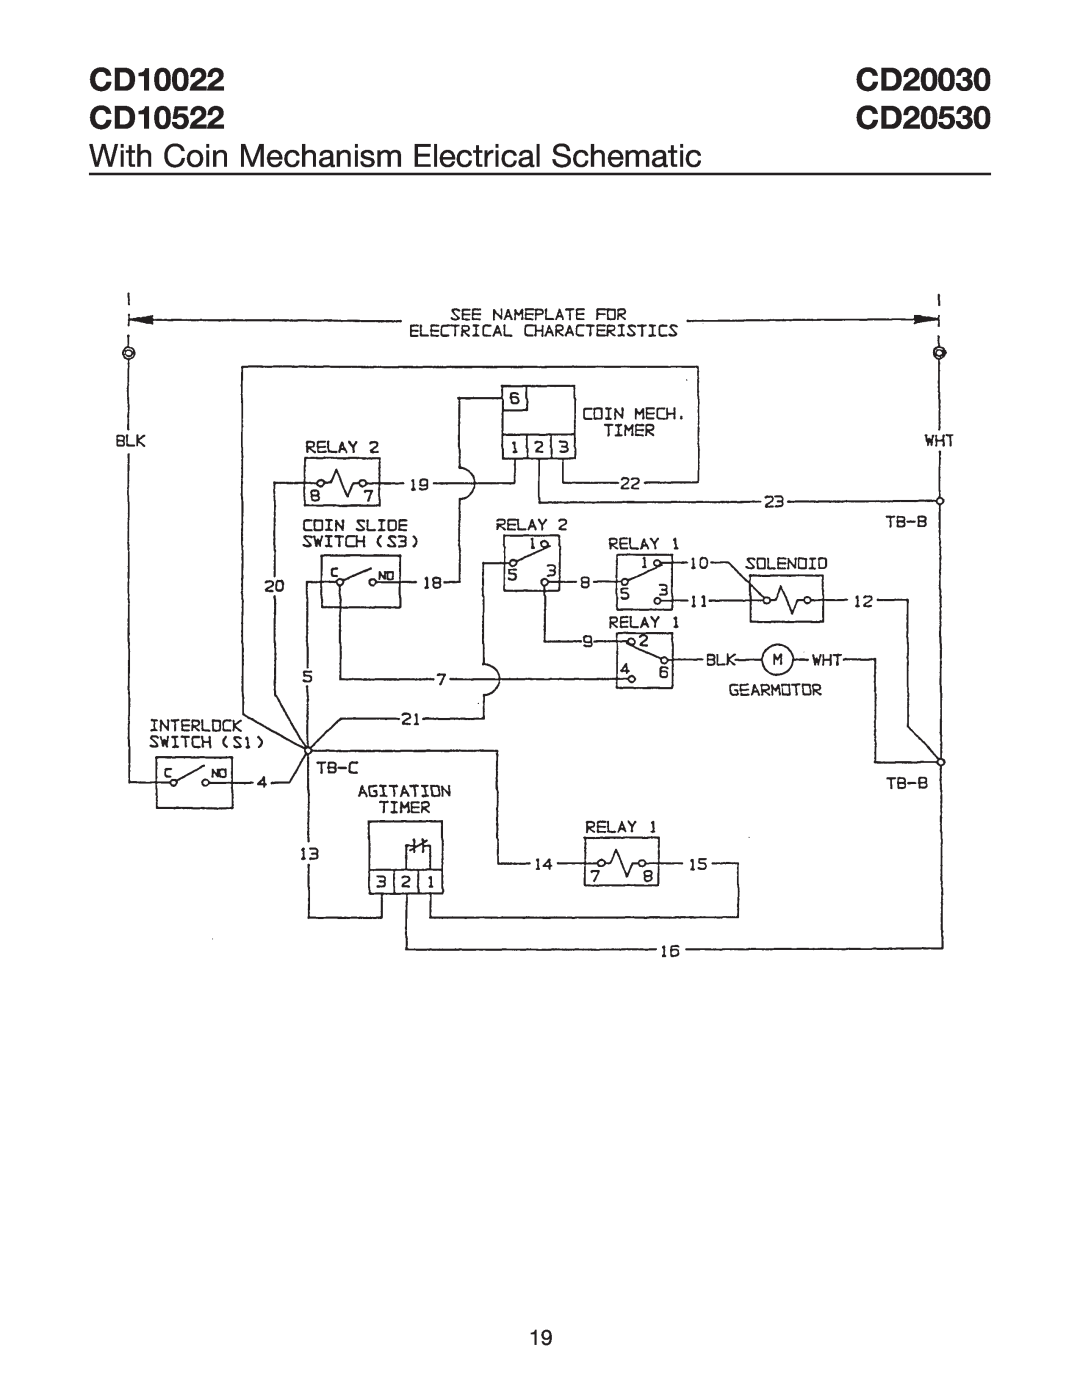 Ice-O-Matic CD20030 CD20530 installation manual CD10022, CD10522, With Coin Mechanism Electrical Schematic 